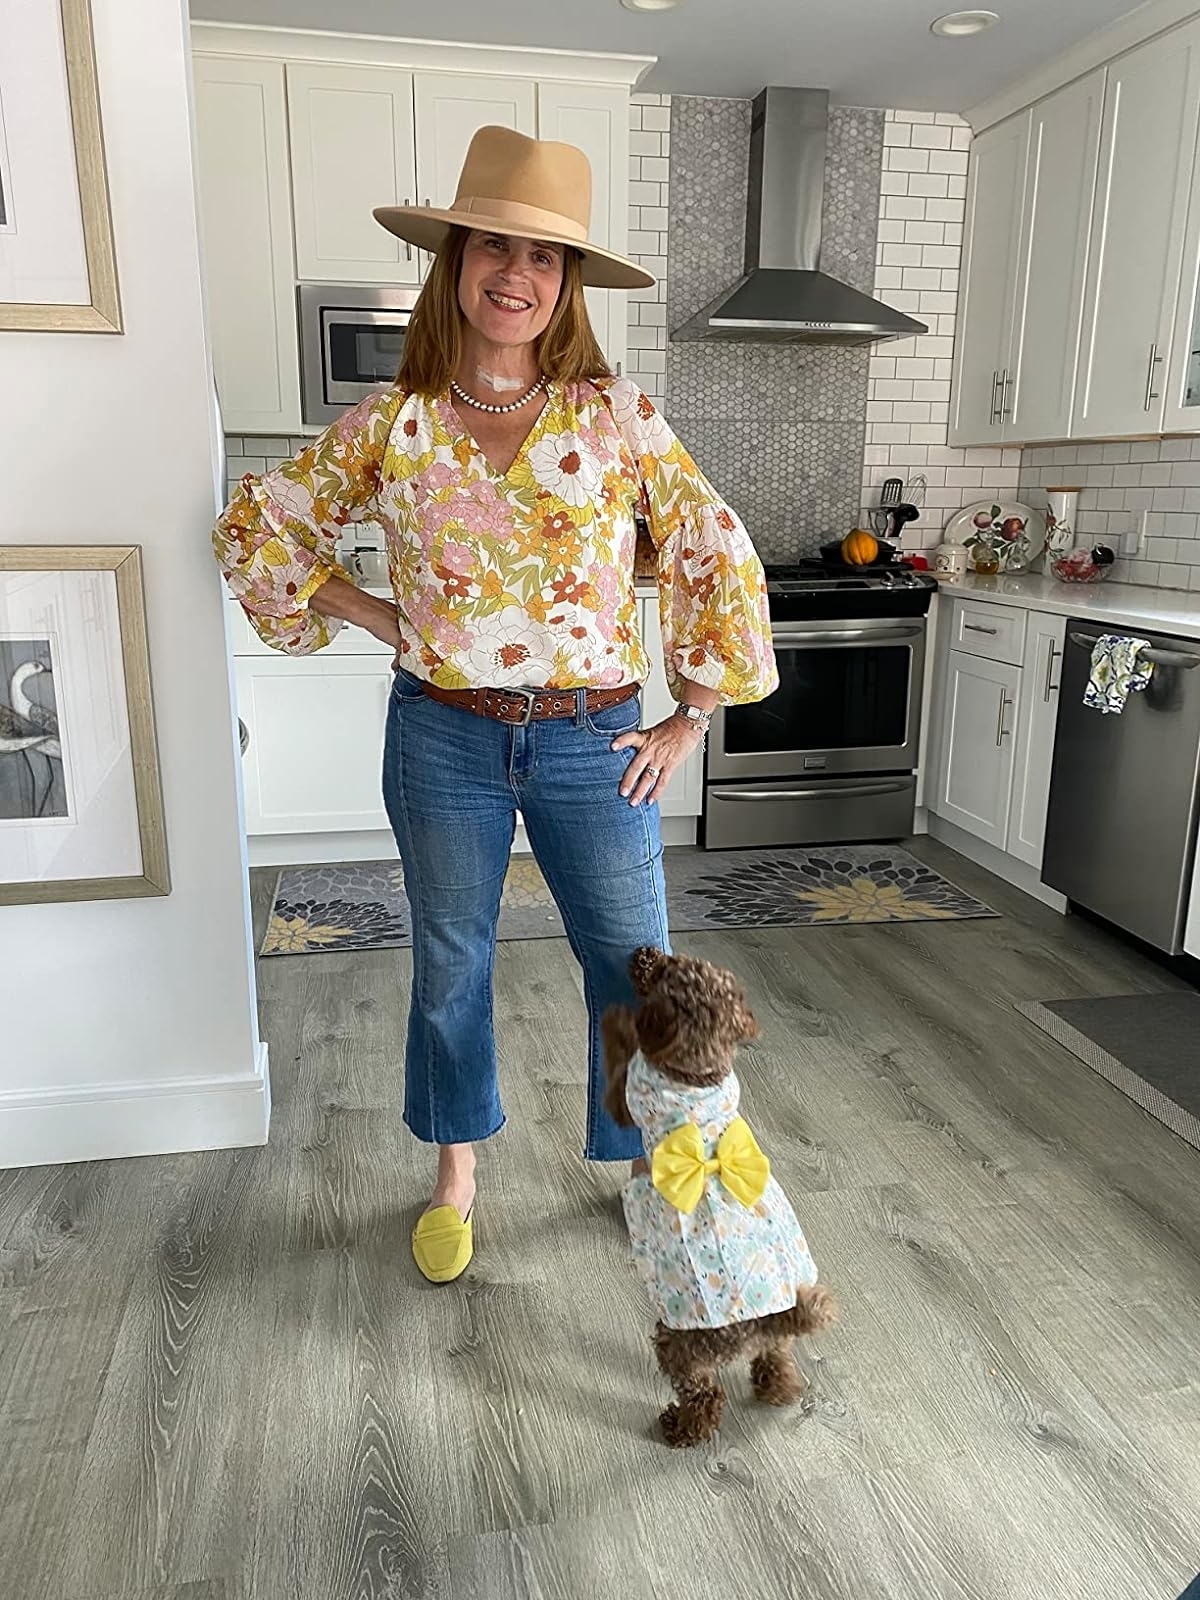 Reviewer in floral blouse and jeans with hat, dog dressed in matching outfit beside her in kitchen